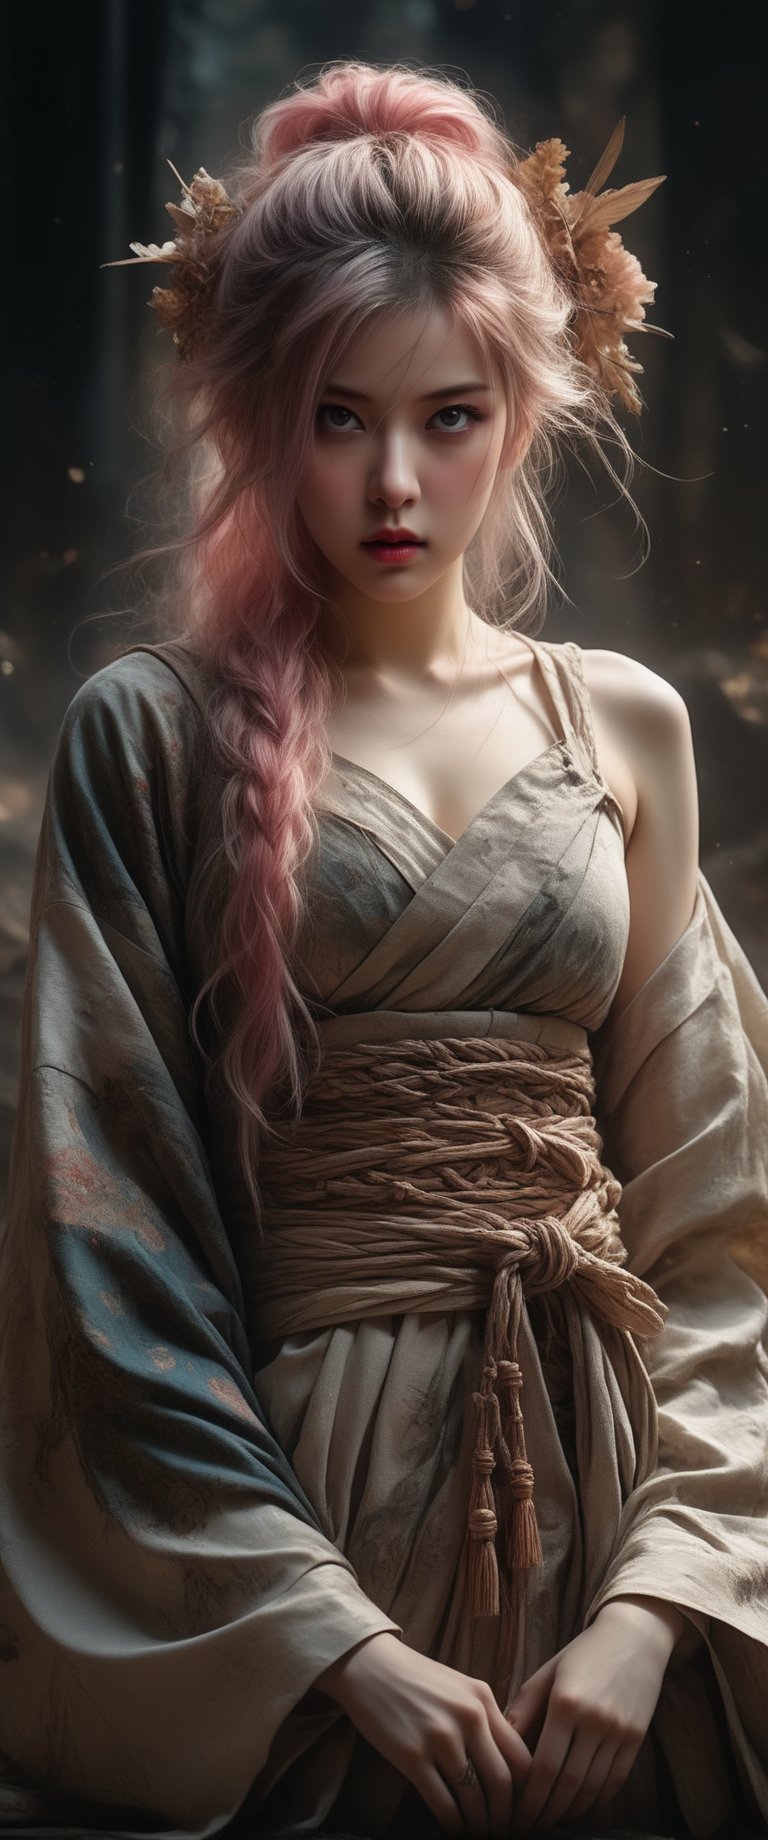 breathtaking RAW photo of female ((THigh quality concept art portrait featuring a fantastic and beautiful and fair 18 years old whit Silver pink hair and Hazel eyes Caucasian o lot of color Elven women(Bella Delphine) whit drawn on weathered parchment, using lord of the rings or dungeons and dragons, character sheet, perfect anatomy, parchment serves as a canvas decorated with ancient runes, made by hand. sketches drawn, by Boris Vallejo, high details,





)), dark and moody style, perfect face, outstretched perfect hands . masterpiece, professional, award-winning, intricate details, ultra high detailed, 64k, dramatic light, volumetric light, dynamic lighting, Epic, splash art .. ), by james jean $, roby dwi antono $, ross tran $. francis bacon $, michal mraz $, adrian ghenie $, petra cortright $, gerhard richter $, takato yamamoto $, ashley wood, tense atmospheric, , , , sooyaaa,IMGFIX,Comic Book-Style,Movie Aesthetic,action shot,photo r3al,bad quality image,oil painting, cinematic moviemaker style,Japan Vibes,H effect,koh_yunjung ,koh_yunjung,kwon-nara,sooyaaa,colorful,bones,,armor,han-hyoju-xl ,DonMn1ghtm4reXL, ct-fujiii
,oiran,furisode,ct-jeniiii, ct-goeuun,yaya, HanFu,golden kimono,kamado nezuko,sword maiden,theresa apocalypse,koling,ct-rosseeiiee,ct-rosseeiiee